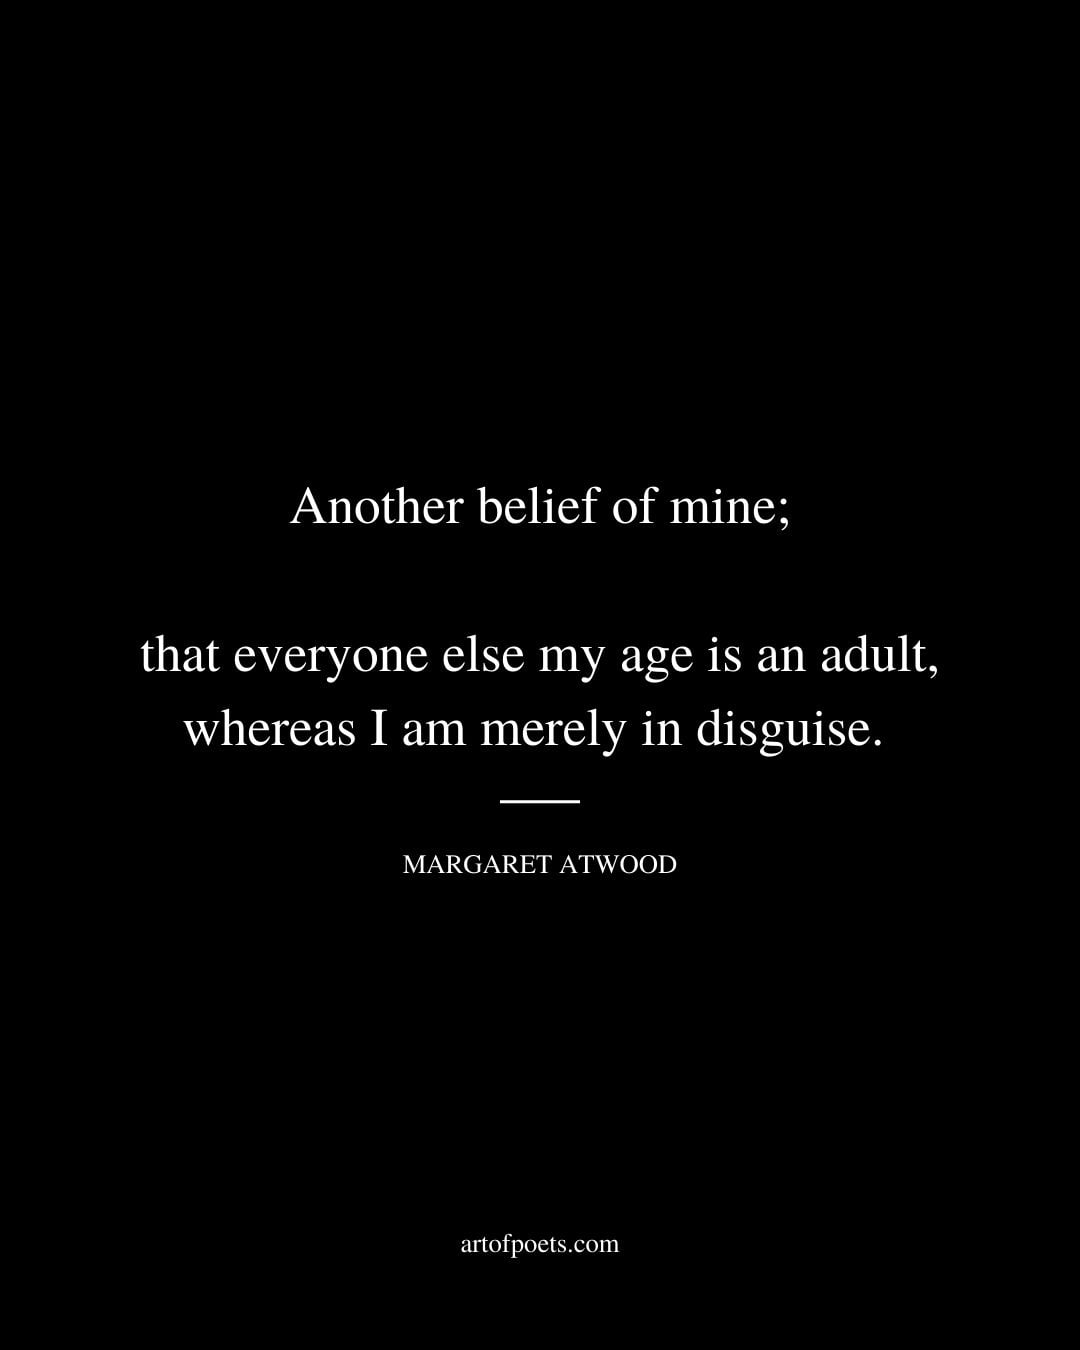 Another belief of mine that everyone else my age is an adult whereas I am merely in disguise. Margaret Atwood